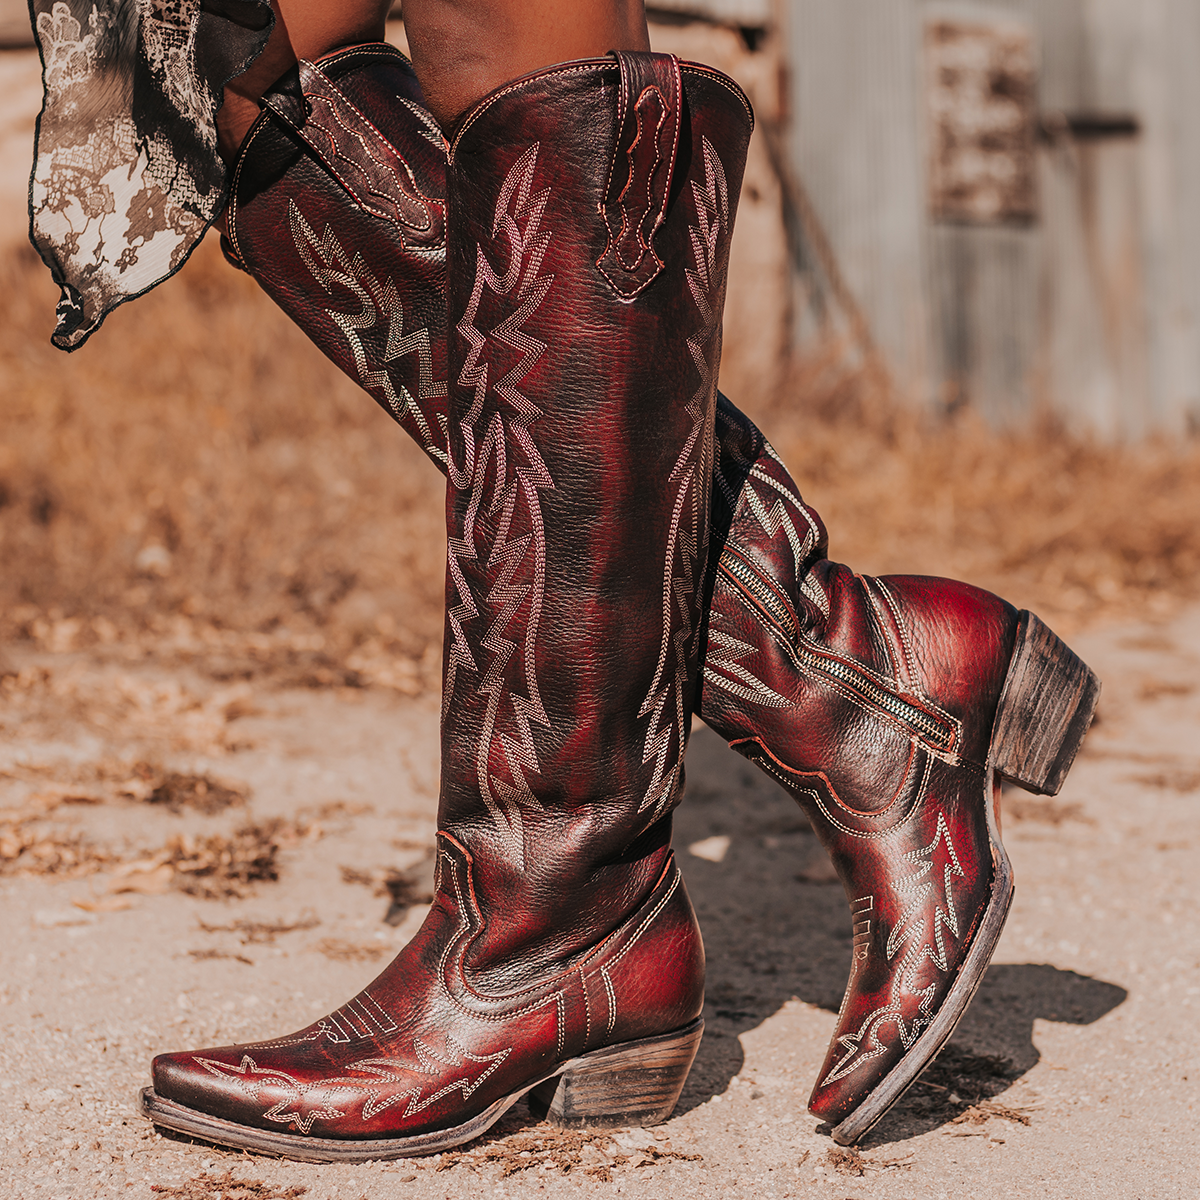 FREEBIRD women's Wonder wine tall leather western boot with stitch detailing and traditional snip toe construction